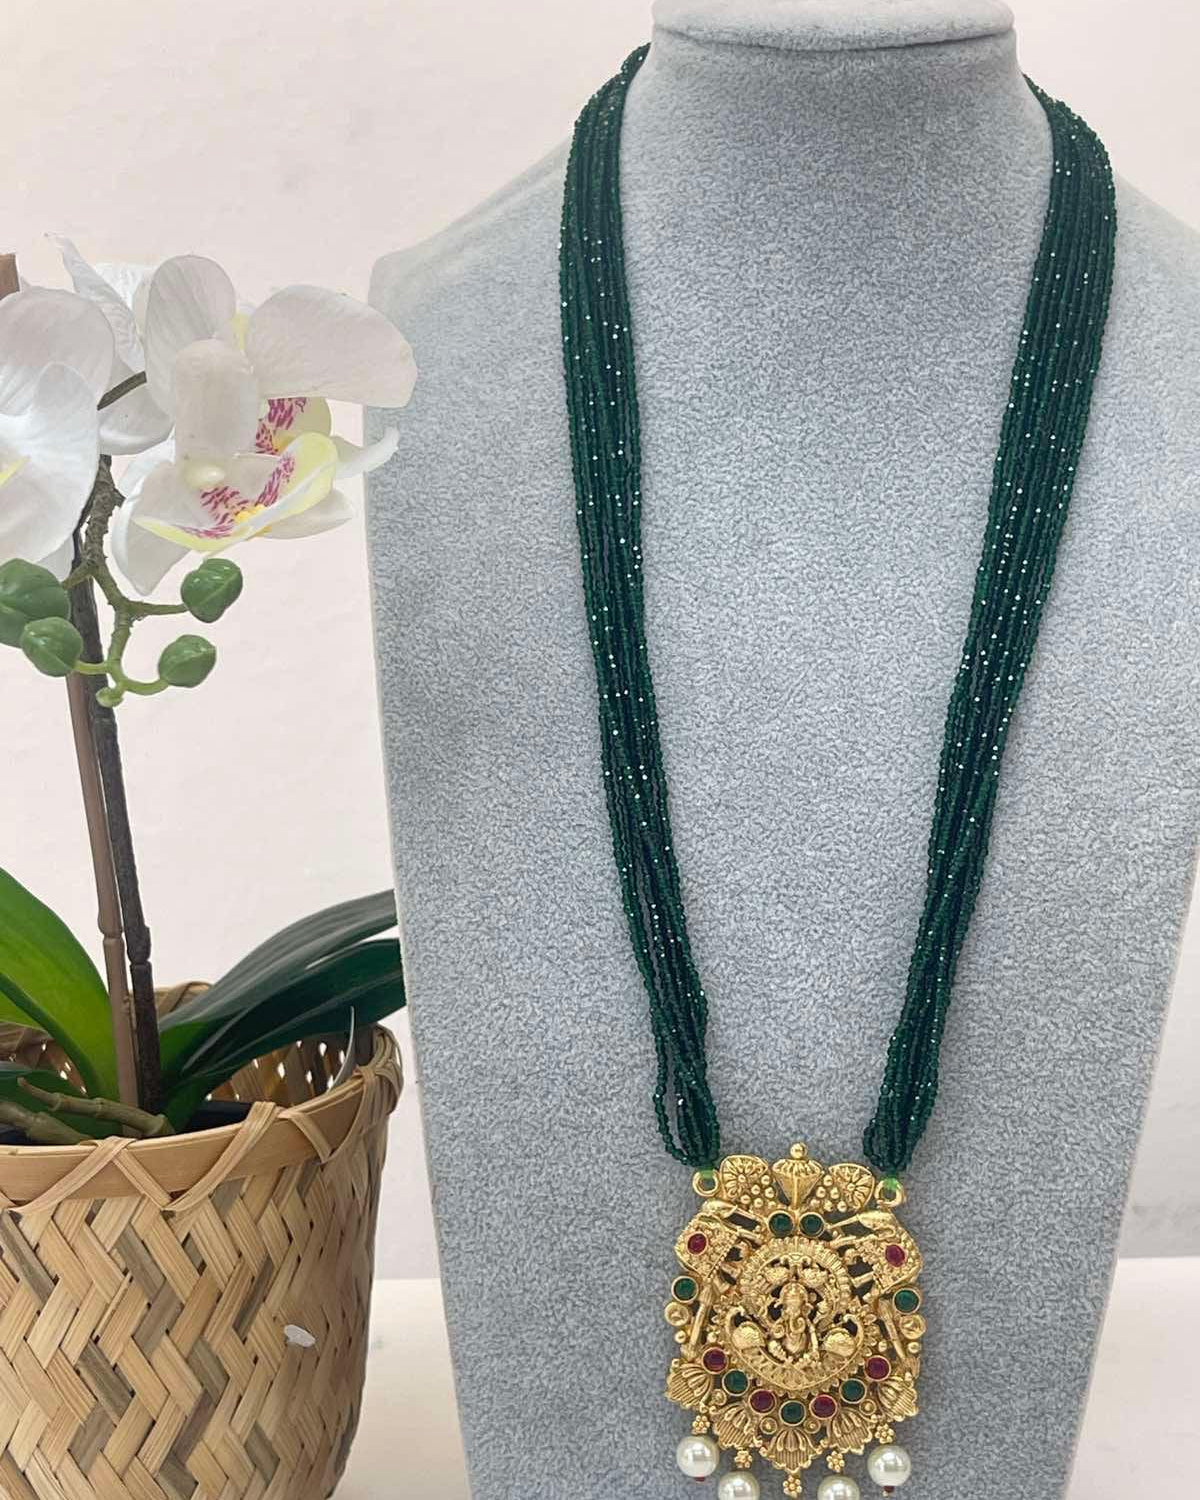 Gold Plated Pendant with Green Hydro Pote - Boutique Nepal